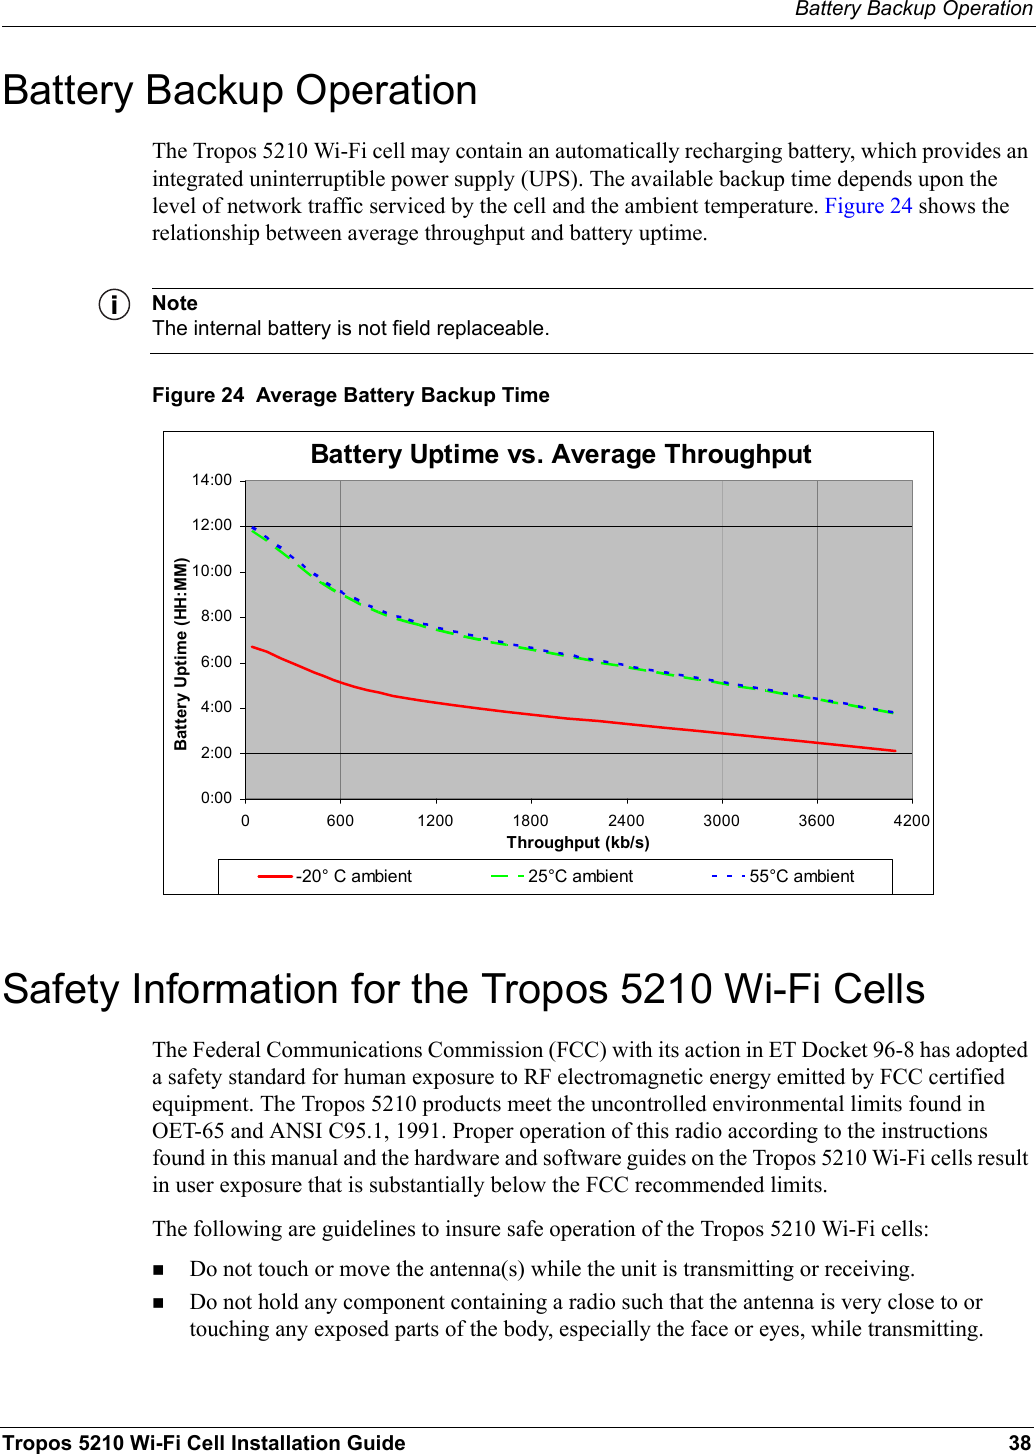 Battery Backup OperationTropos 5210 Wi-Fi Cell Installation Guide 38Battery Backup OperationThe Tropos 5210 Wi-Fi cell may contain an automatically recharging battery, which provides an integrated uninterruptible power supply (UPS). The available backup time depends upon the level of network traffic serviced by the cell and the ambient temperature. Figure 24 shows the relationship between average throughput and battery uptime.NoteThe internal battery is not field replaceable.Figure 24  Average Battery Backup TimeSafety Information for the Tropos 5210 Wi-Fi CellsThe Federal Communications Commission (FCC) with its action in ET Docket 96-8 has adopted a safety standard for human exposure to RF electromagnetic energy emitted by FCC certified equipment. The Tropos 5210 products meet the uncontrolled environmental limits found in OET-65 and ANSI C95.1, 1991. Proper operation of this radio according to the instructions found in this manual and the hardware and software guides on the Tropos 5210 Wi-Fi cells result in user exposure that is substantially below the FCC recommended limits.The following are guidelines to insure safe operation of the Tropos 5210 Wi-Fi cells:Do not touch or move the antenna(s) while the unit is transmitting or receiving.Do not hold any component containing a radio such that the antenna is very close to or touching any exposed parts of the body, especially the face or eyes, while transmitting. Battery Uptime vs. Average Throughput0:002:004:006:008:0010:0012:0014:000 600 1200 1800 2400 3000 3600 4200Throughput (kb/s)Battery Uptime (HH:MM)-20° C ambient 25°C ambient 55°C ambient